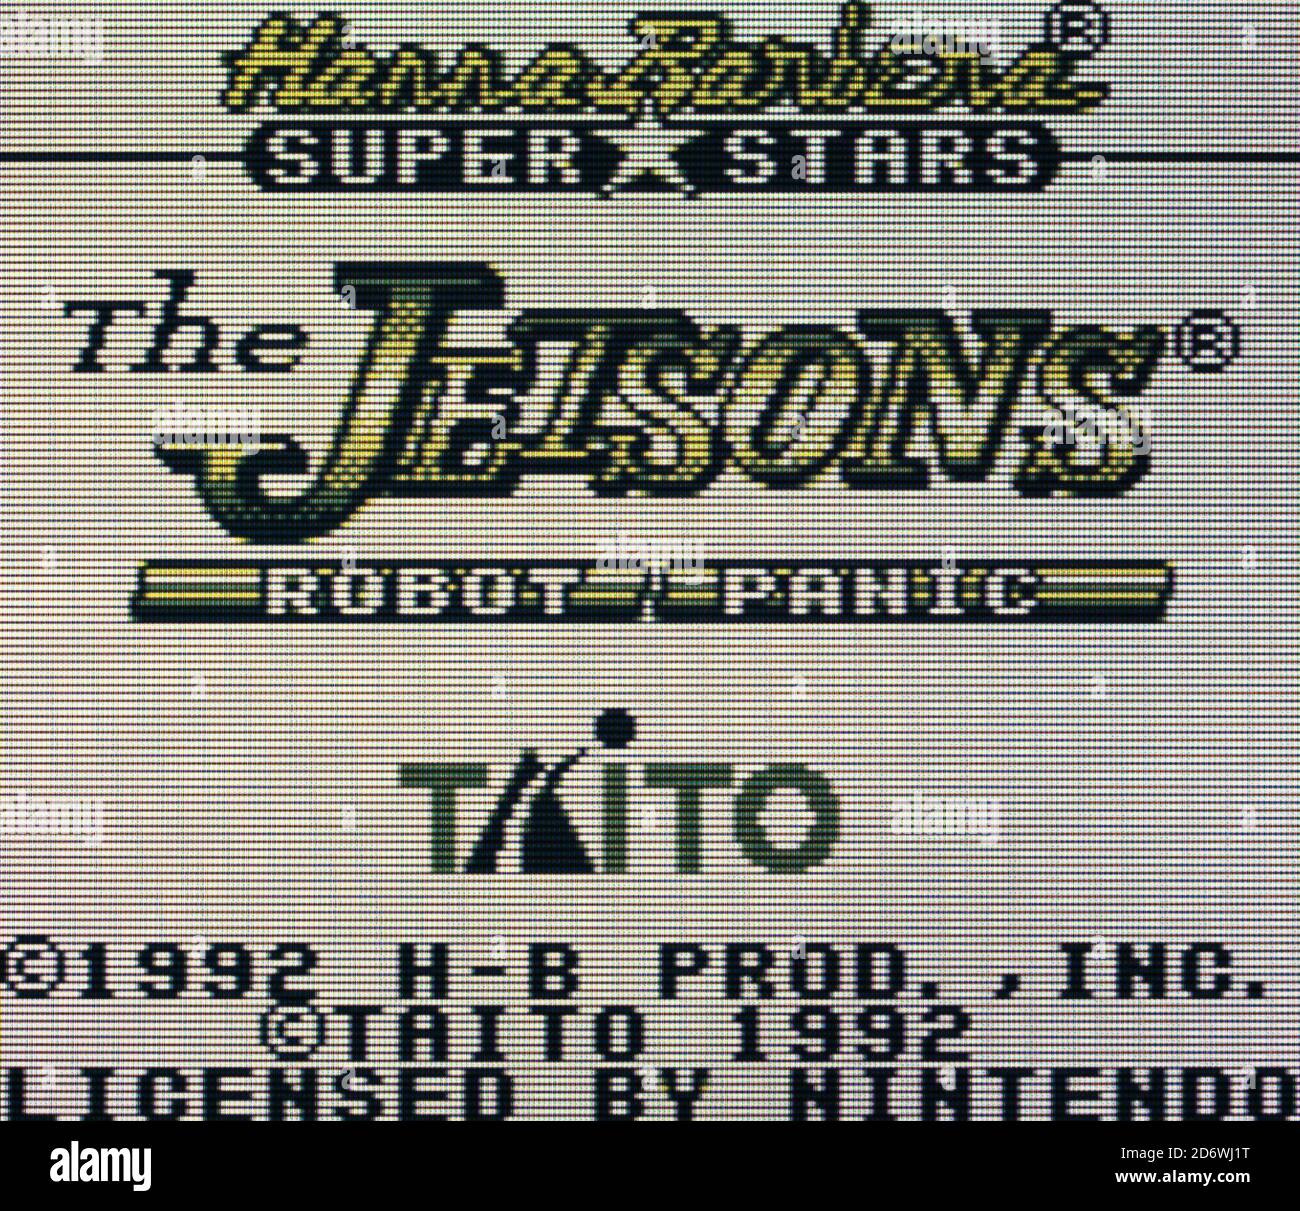 The Jetsons Robot Panic - Nintendo Gameboy Videogame - Editorial use only Stock Photo